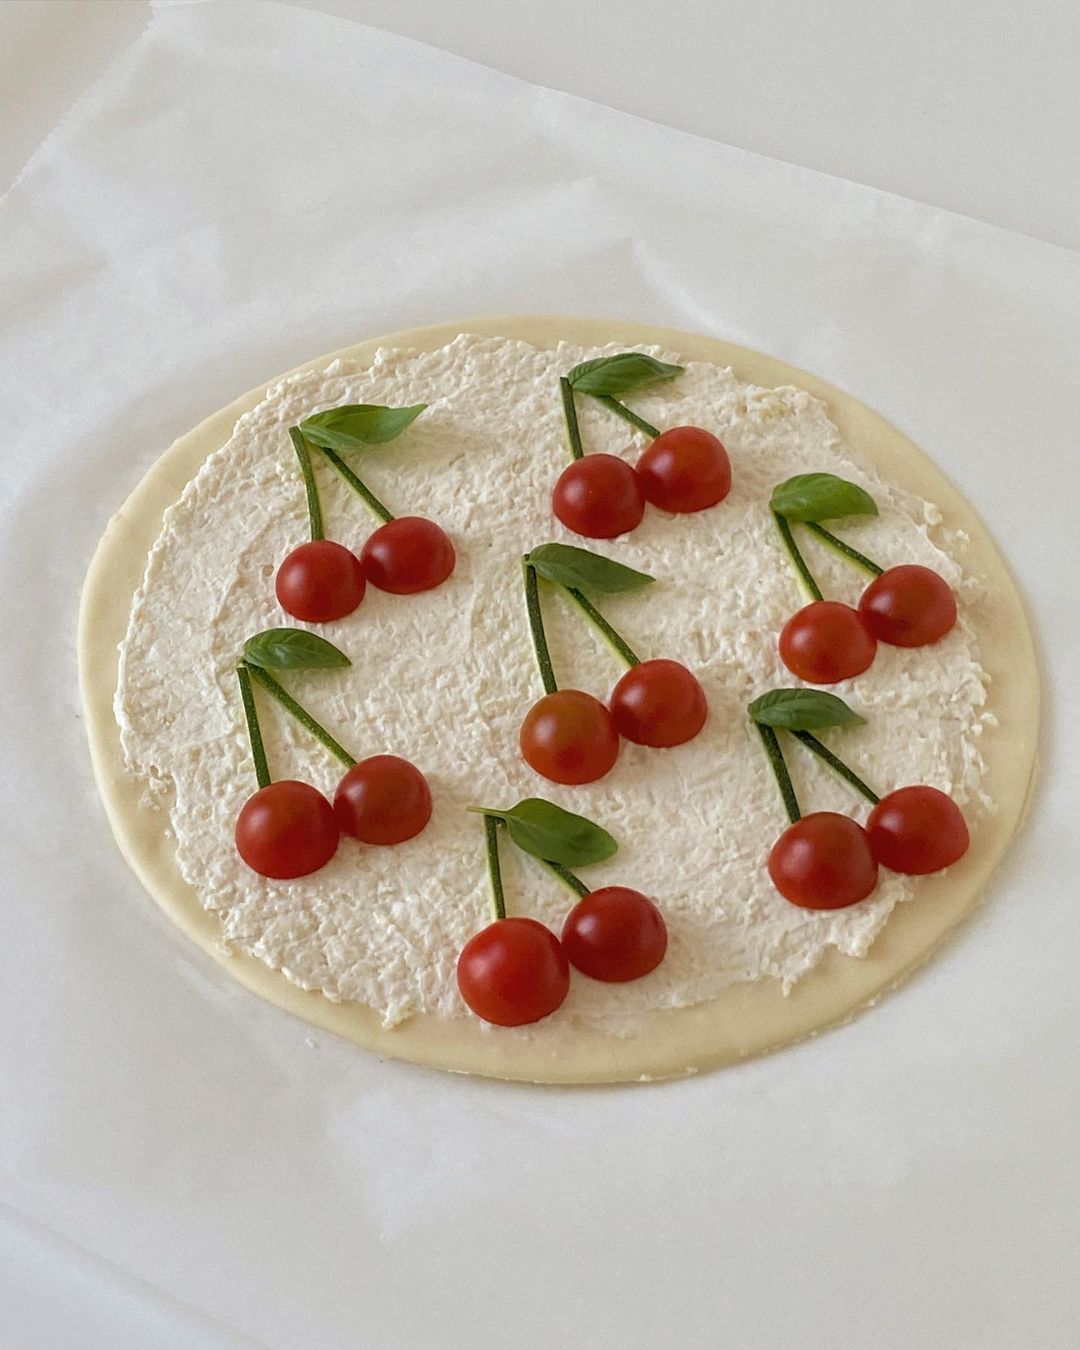 From Instagram | In the Kitchen: Whimsical Food Art & More by Celine @celineyrs